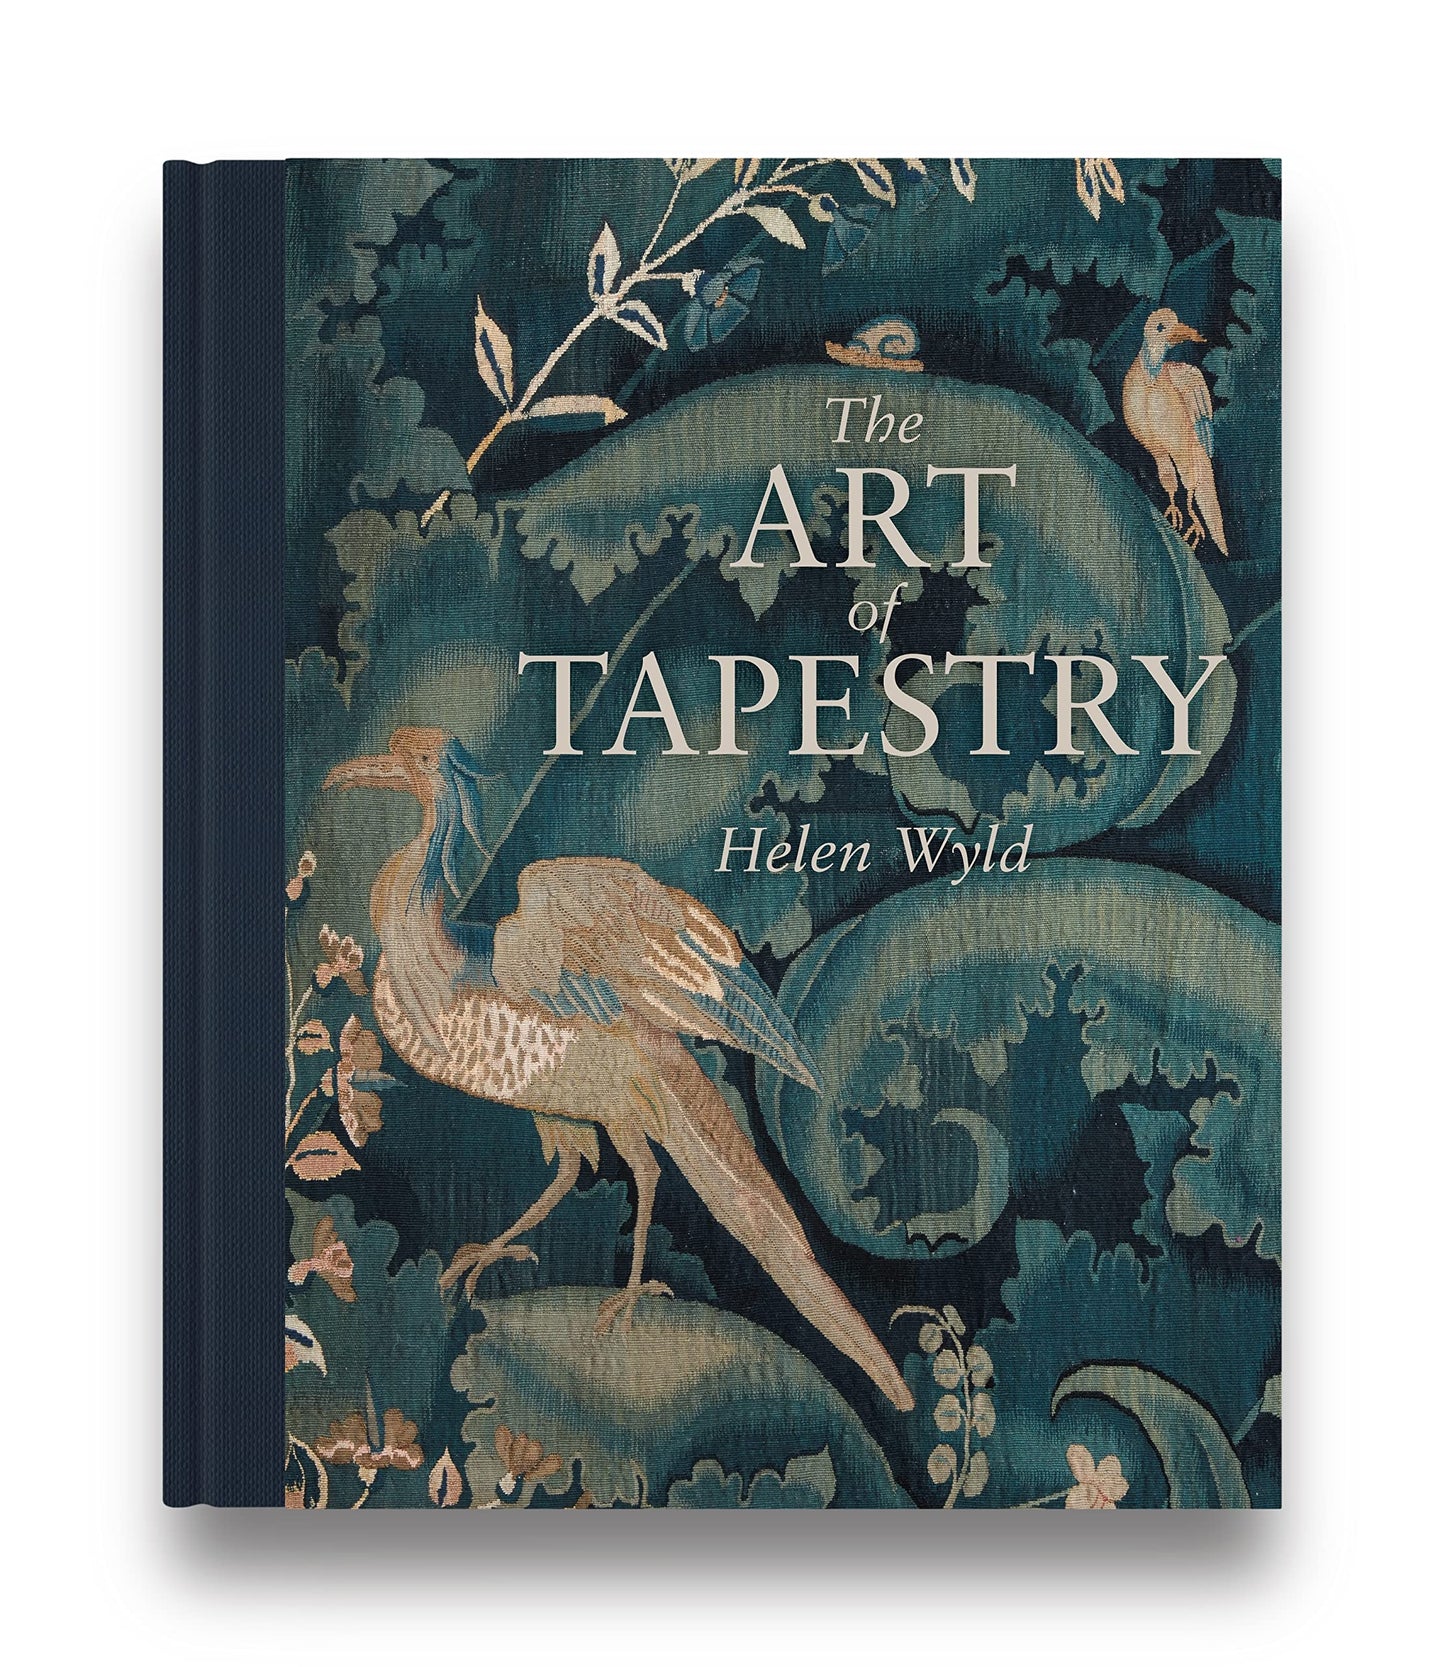 BOOK: The Art of Tapestry, Helen Wyld